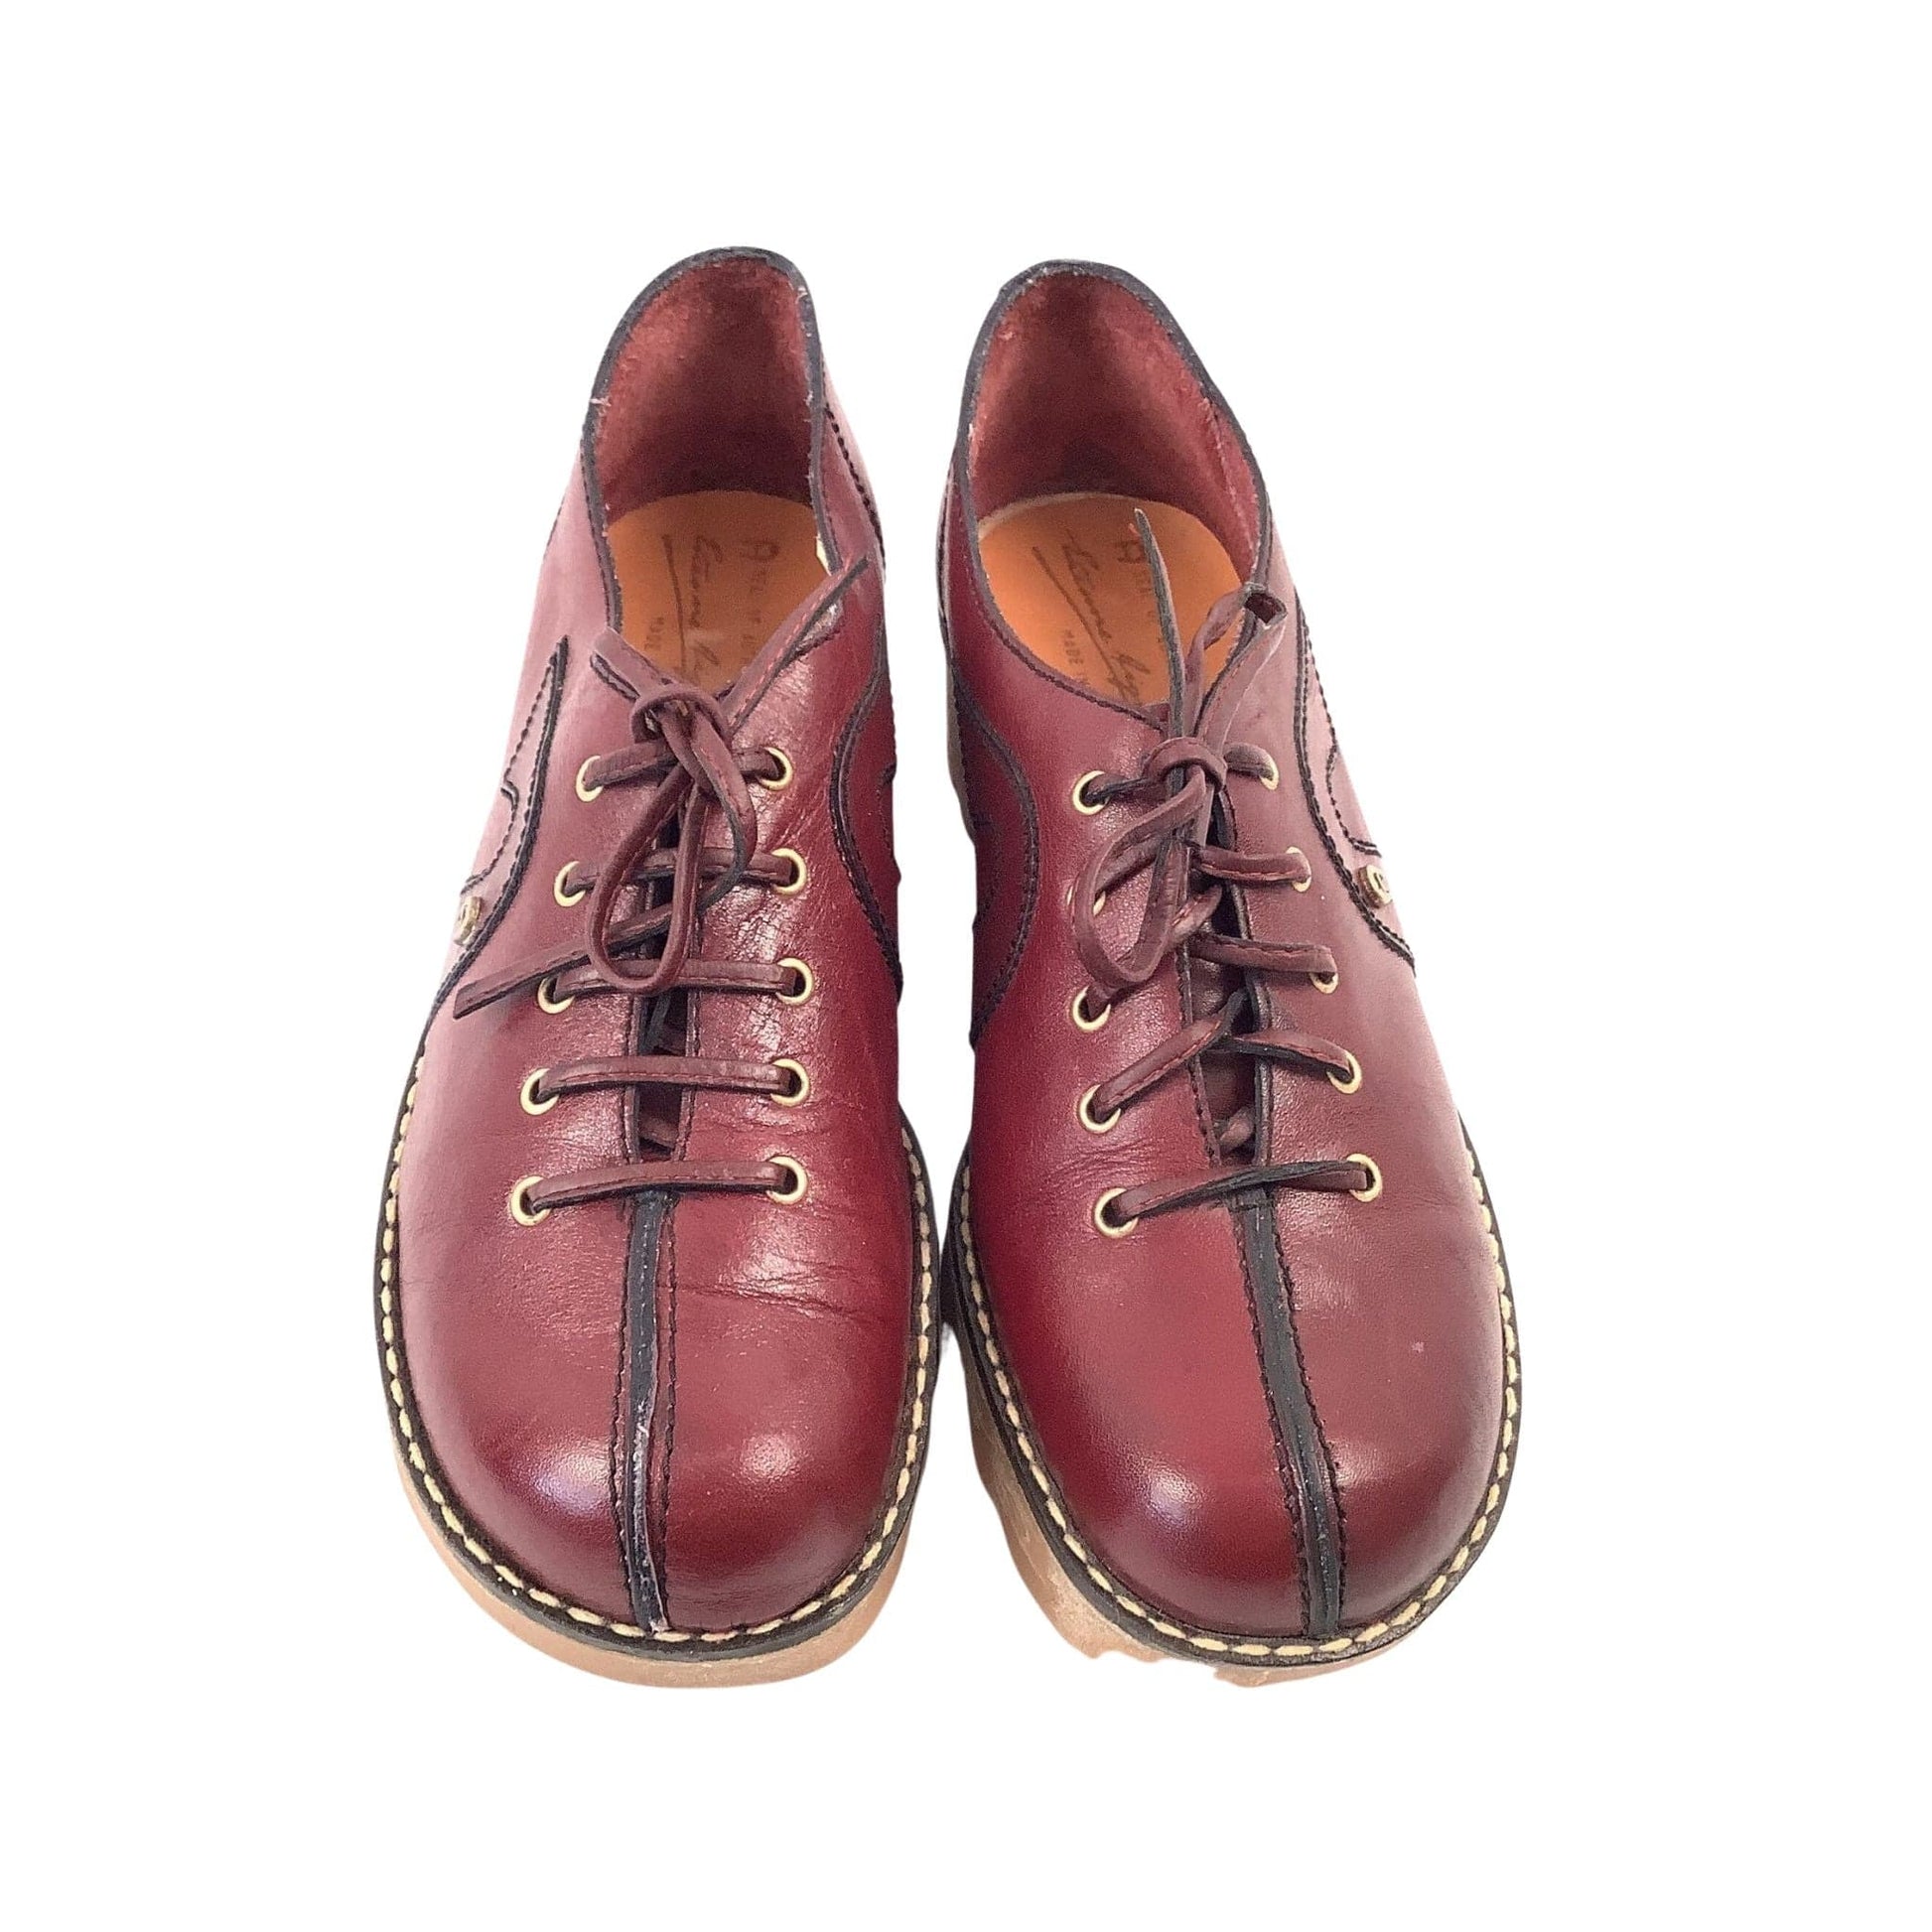 Aigner Bowling Style Shoes 9 / Burgundy / Vintage 1970s